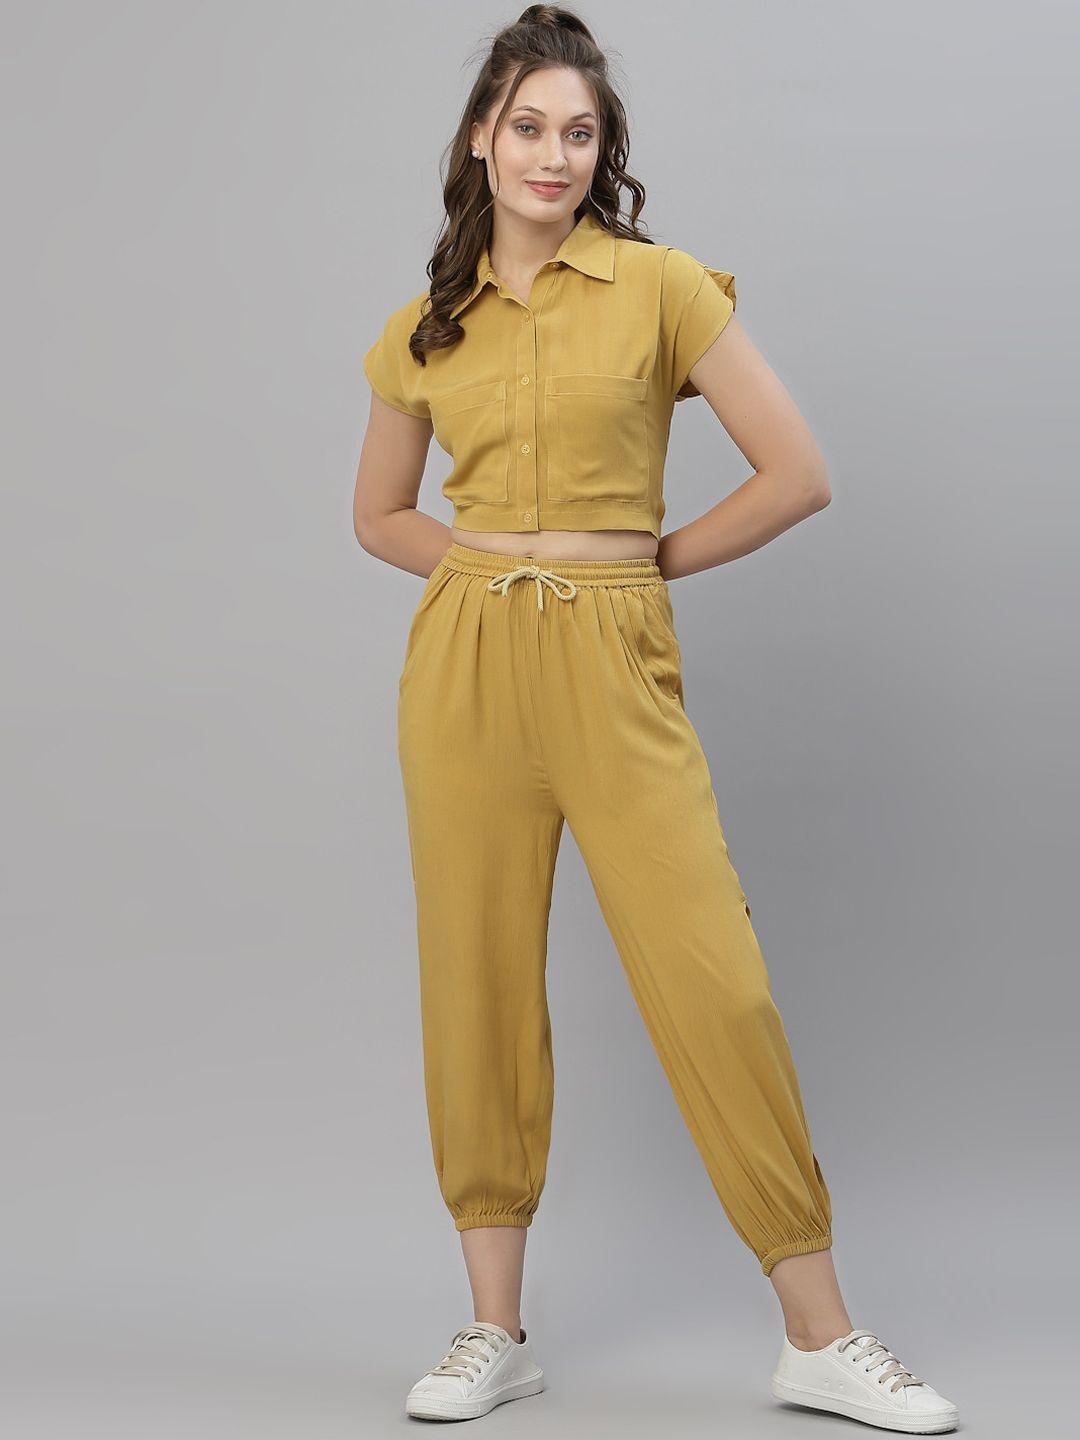 kassually women mustard yellow solid co-ords